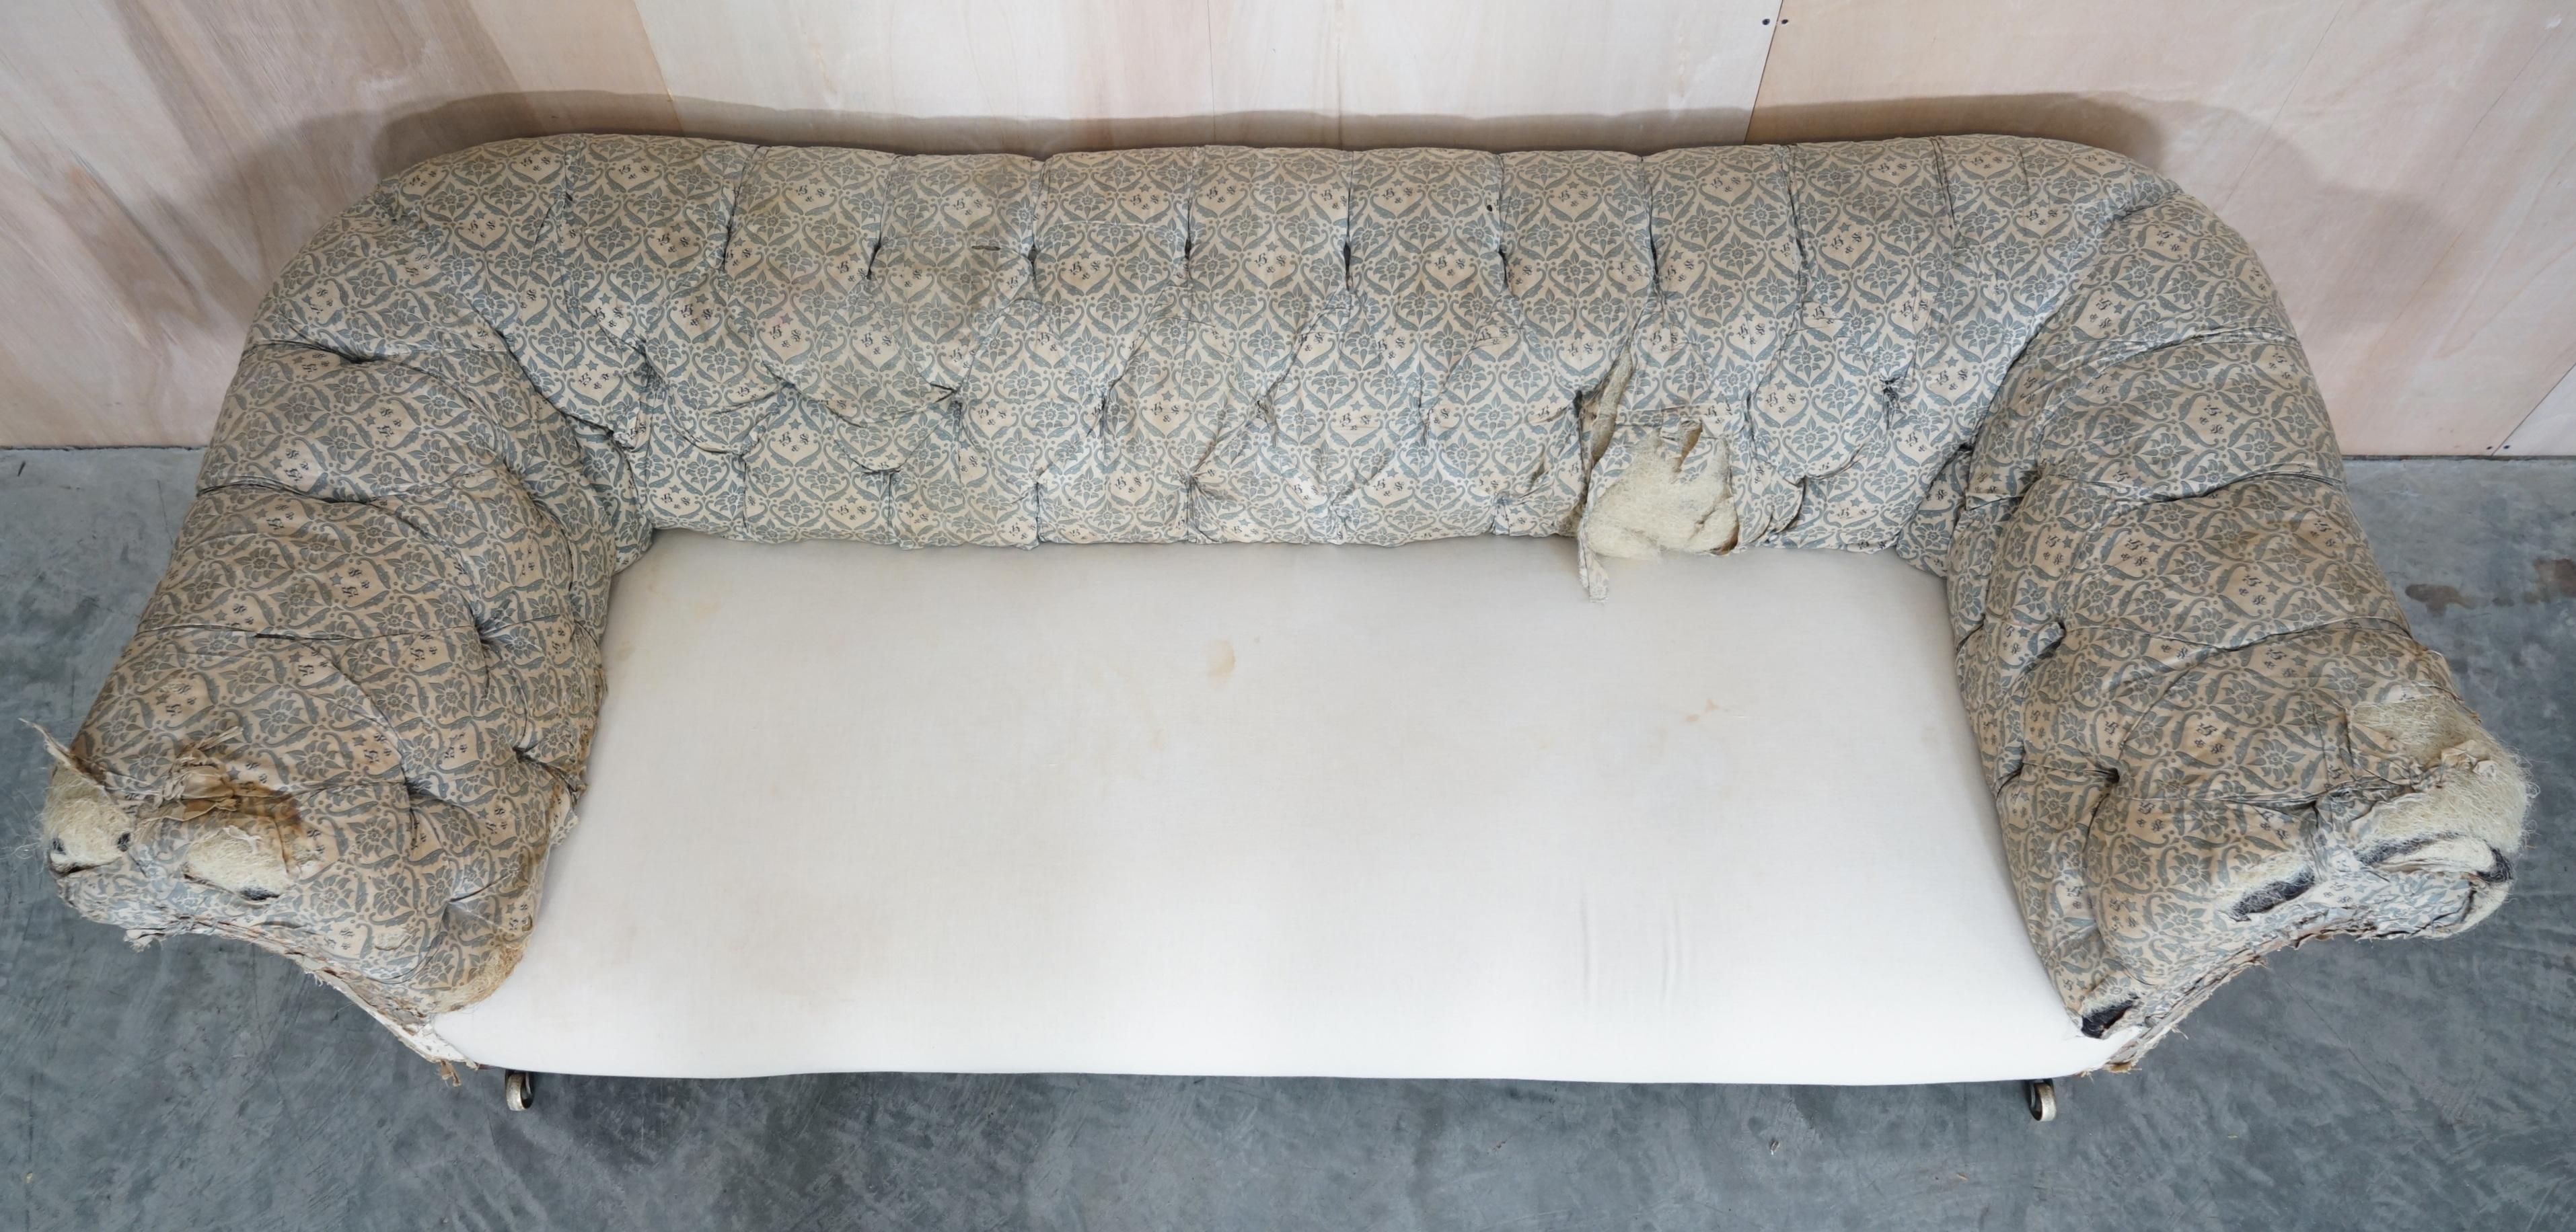 Important Antique Victorian Howard & Son's Chesterfield Sofa Inc Ticking Fabric For Sale 2